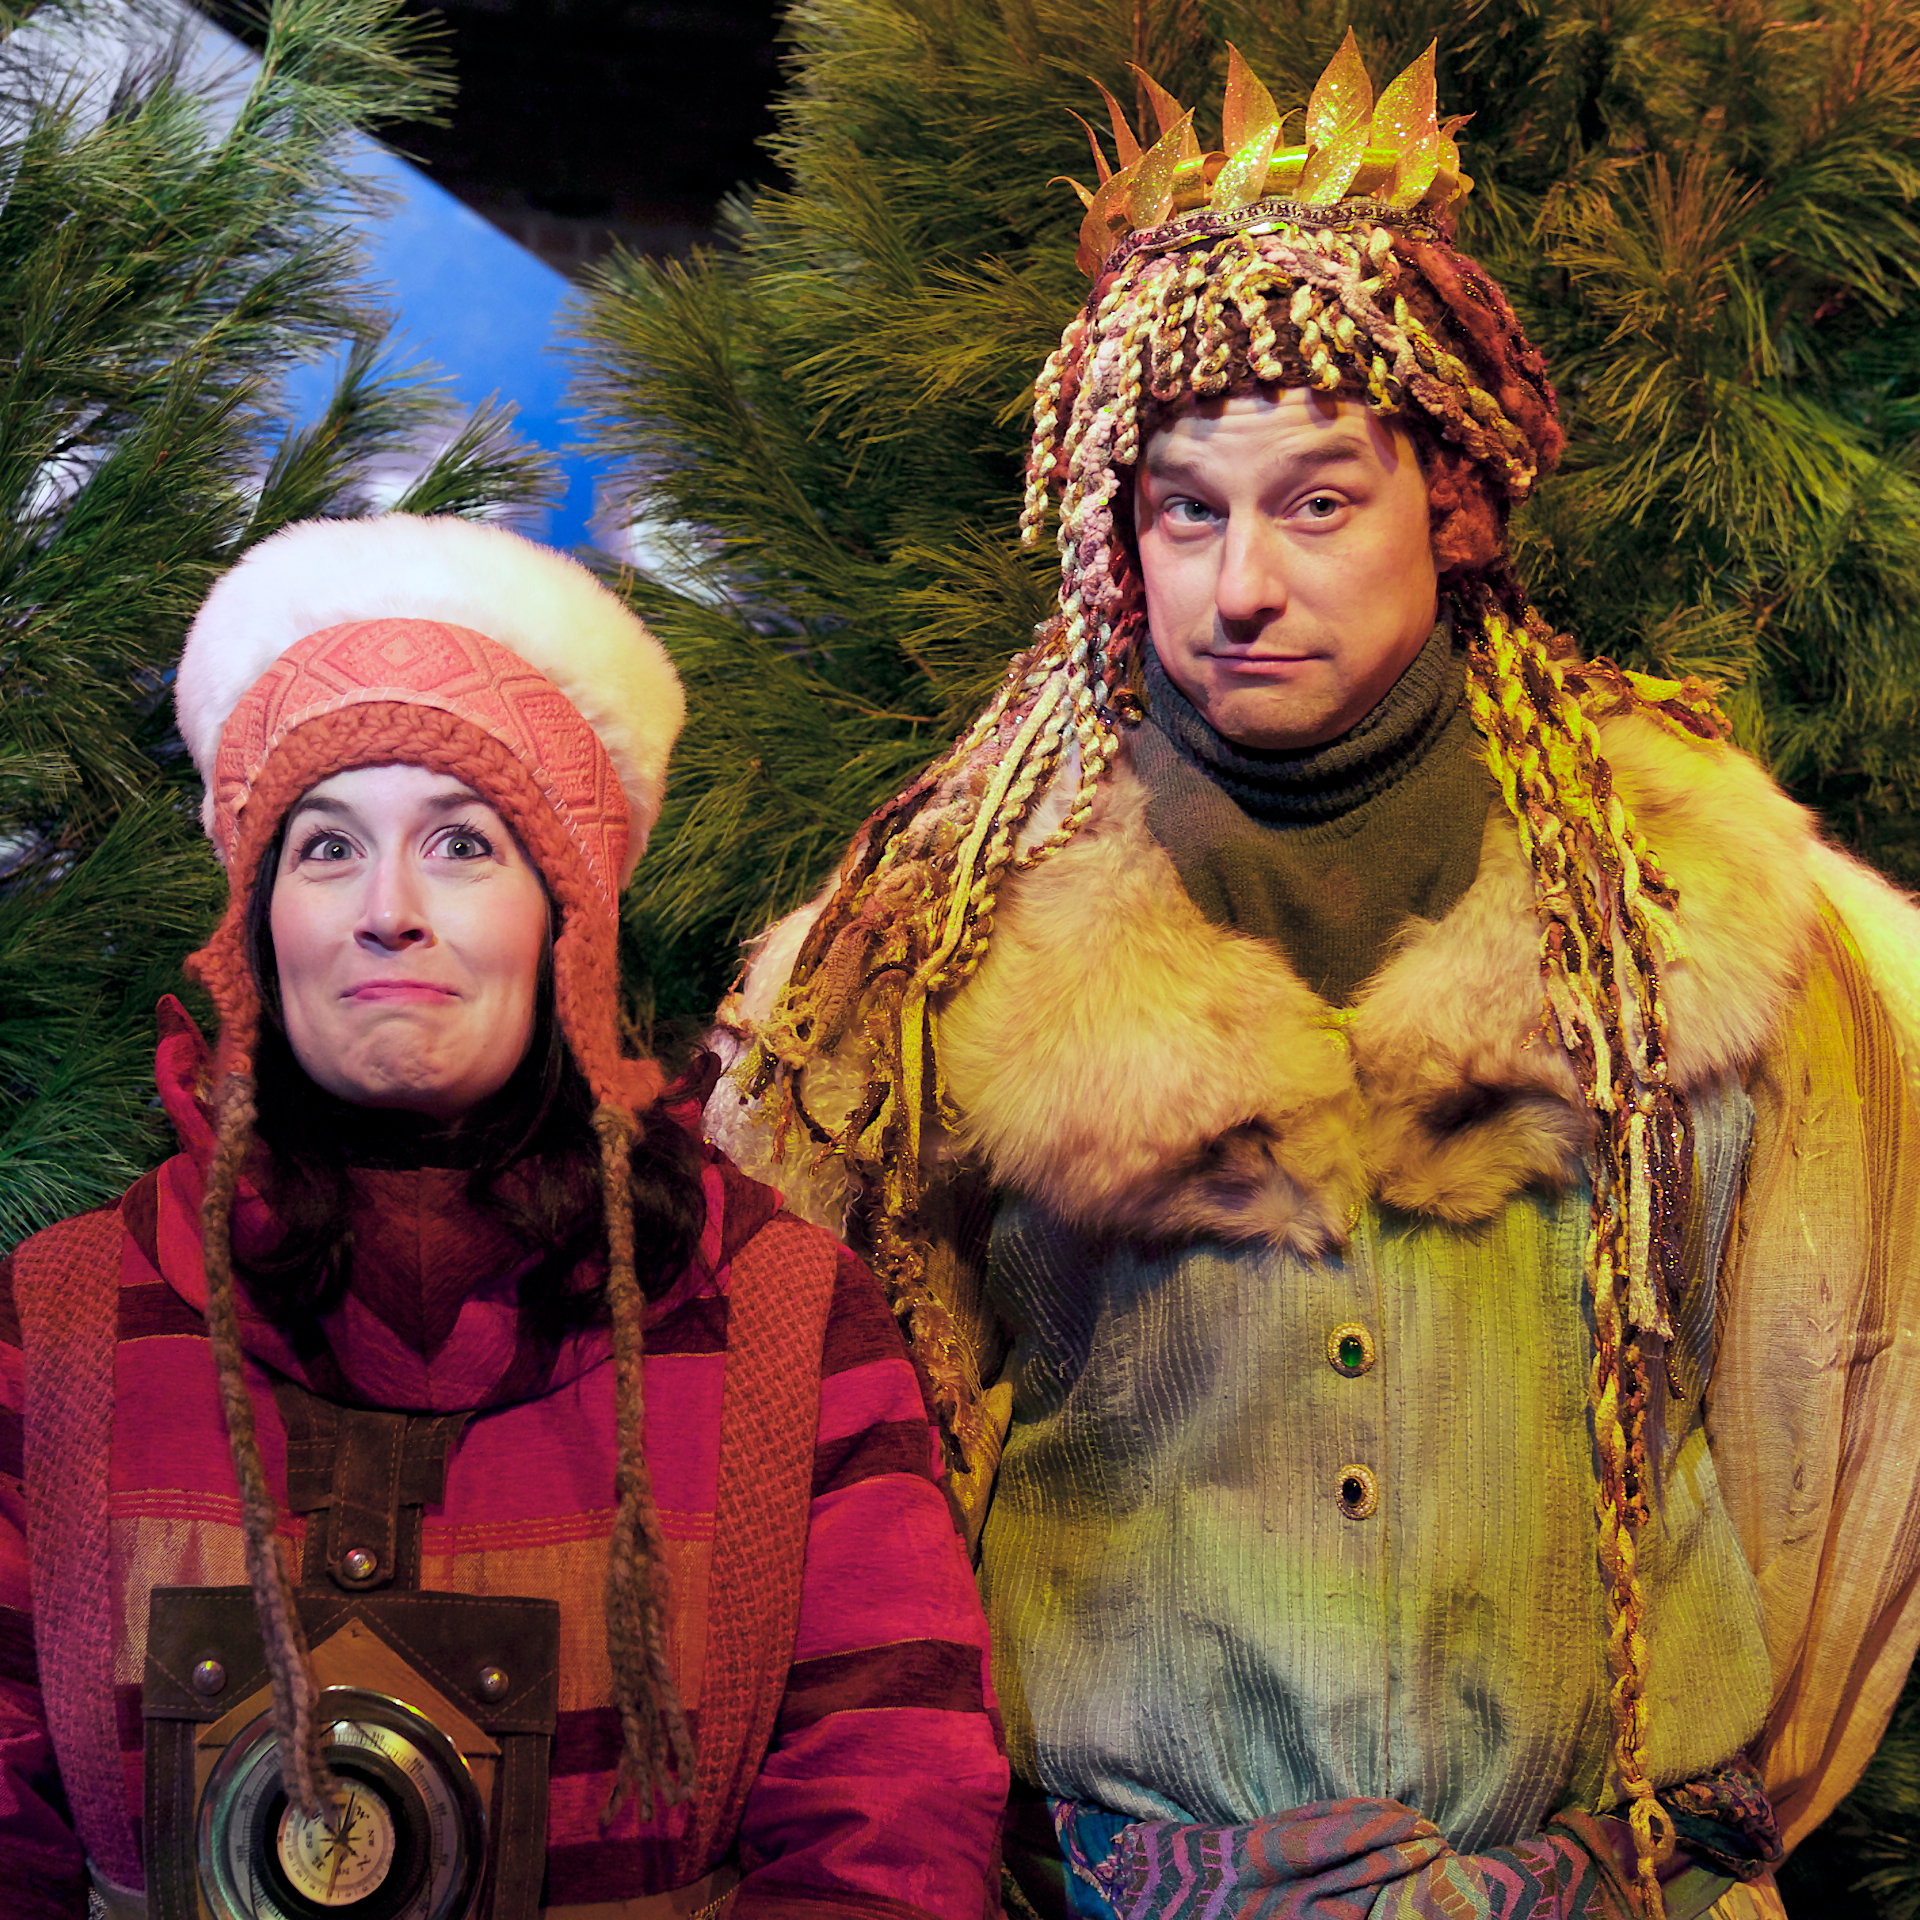 A man in a turkey costume stands behind a woman in winterwear.